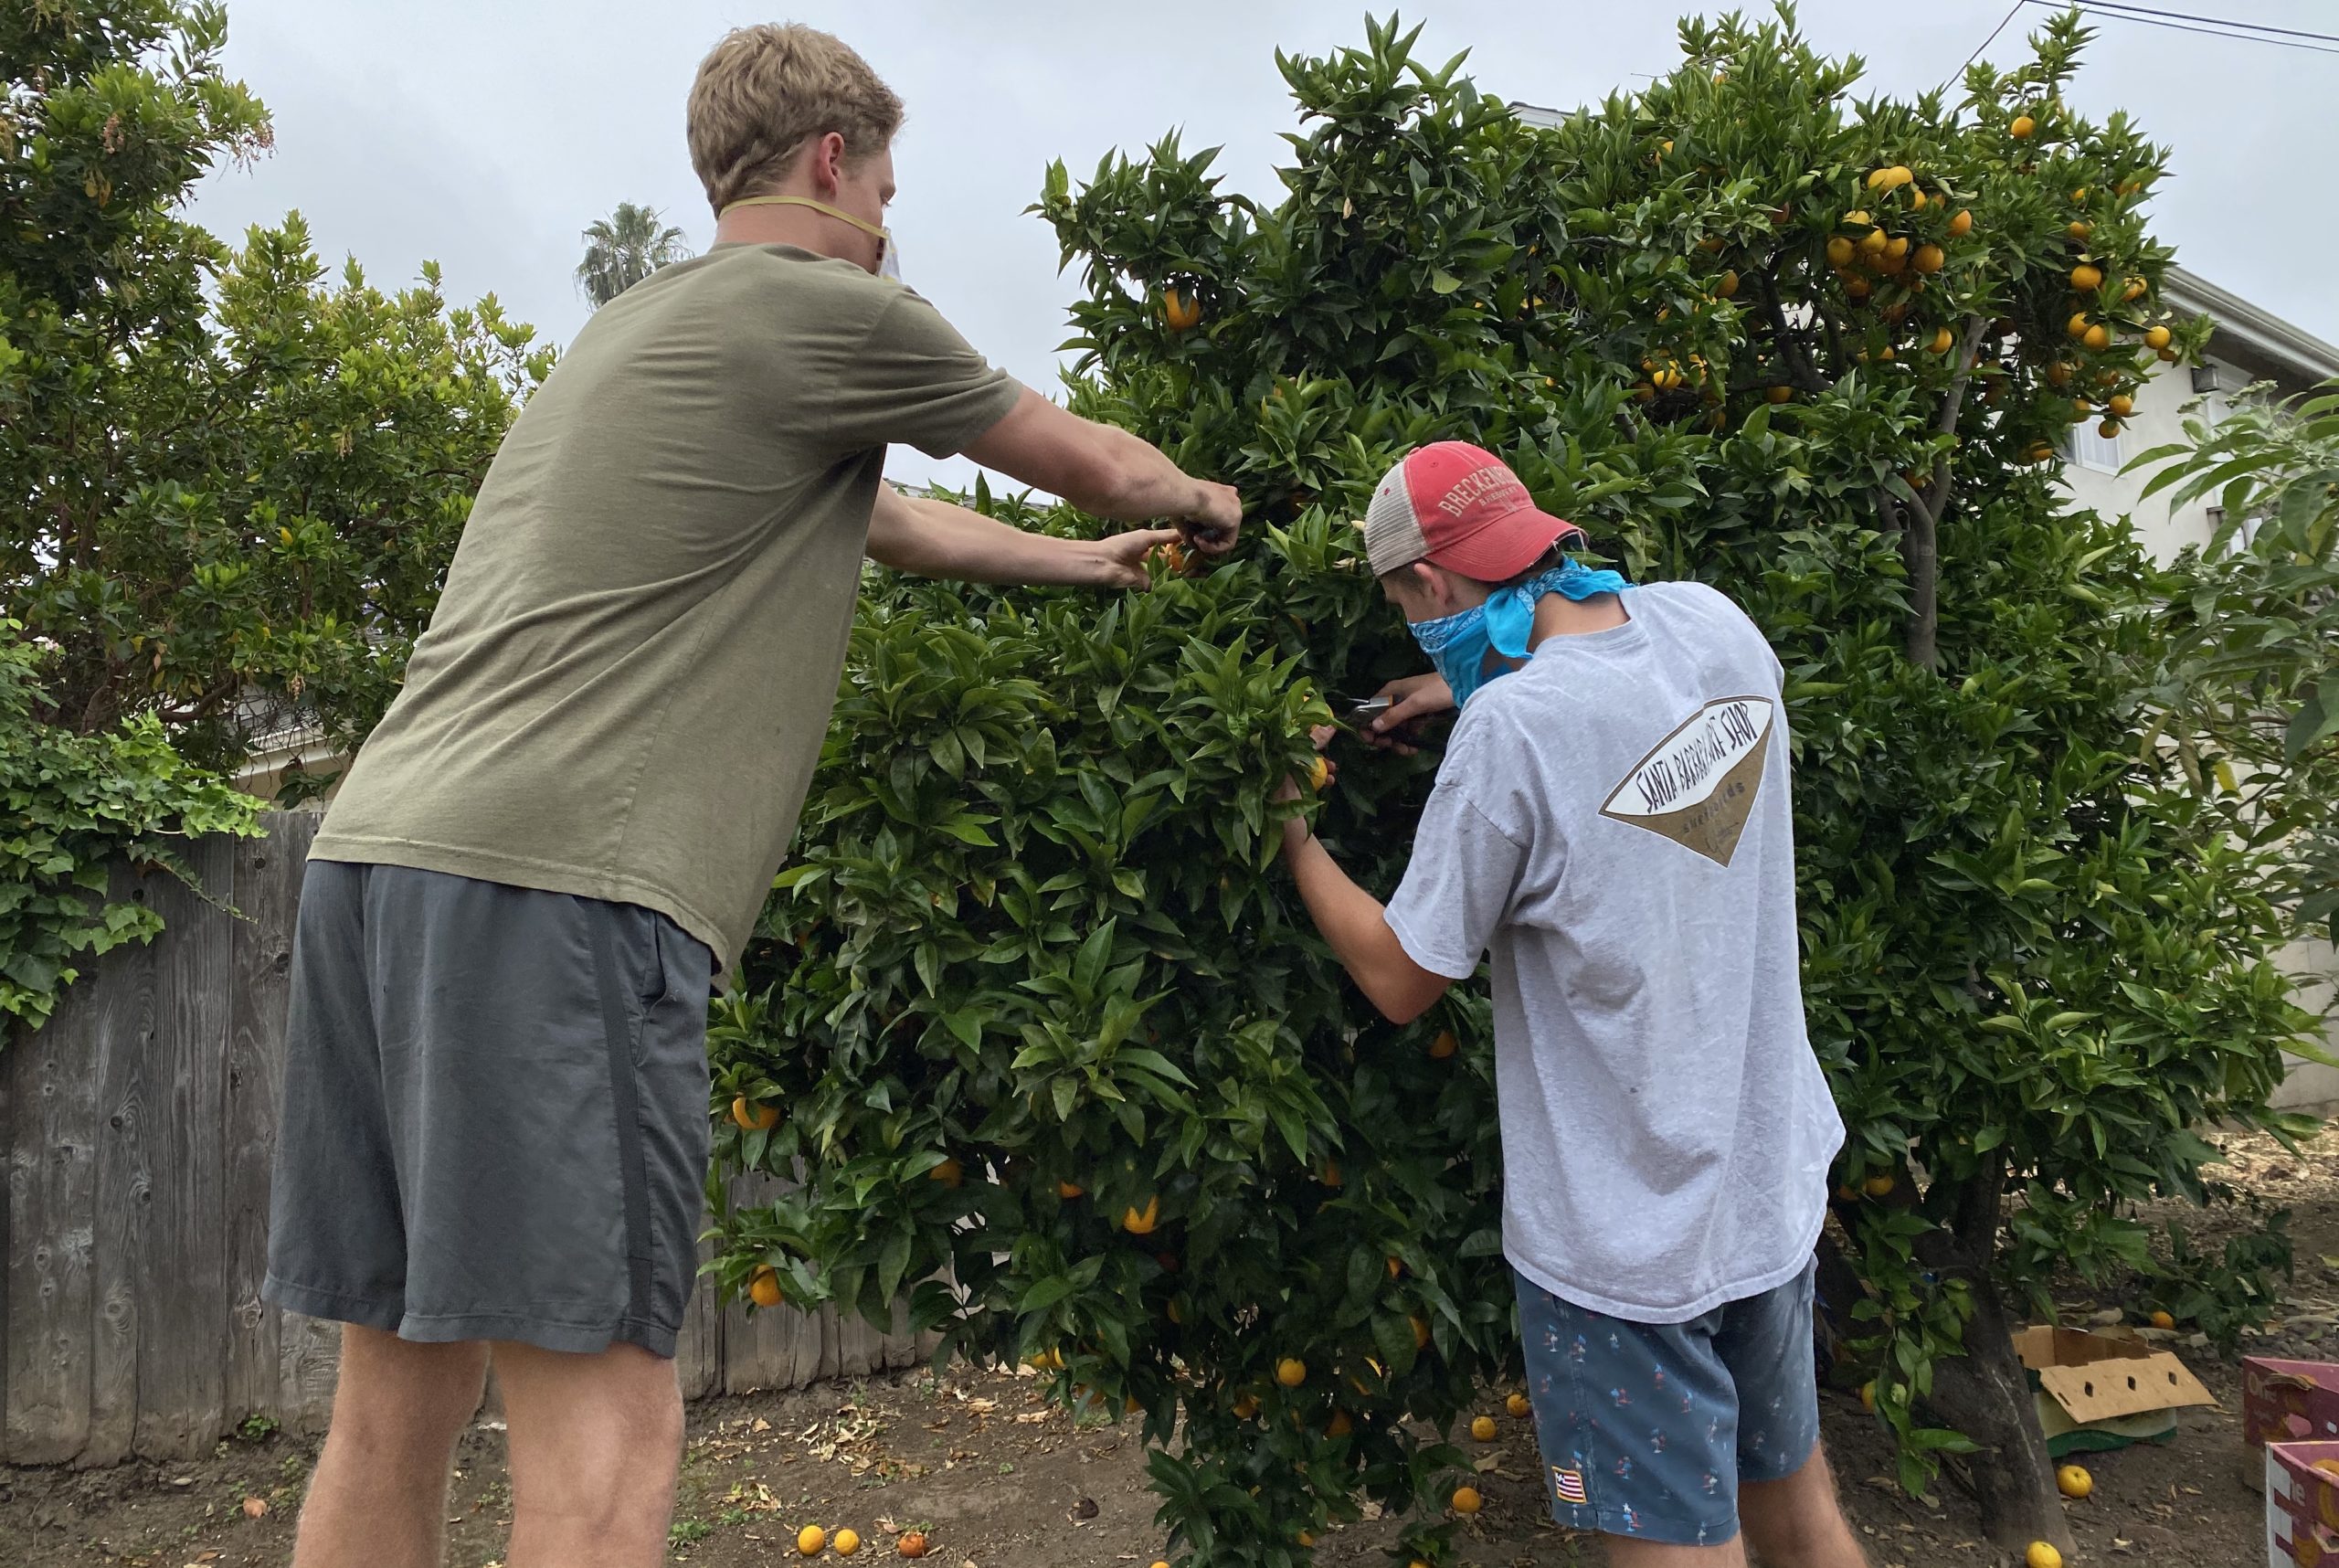 Local teens gleaning fruit from trees for those in need - KEYT